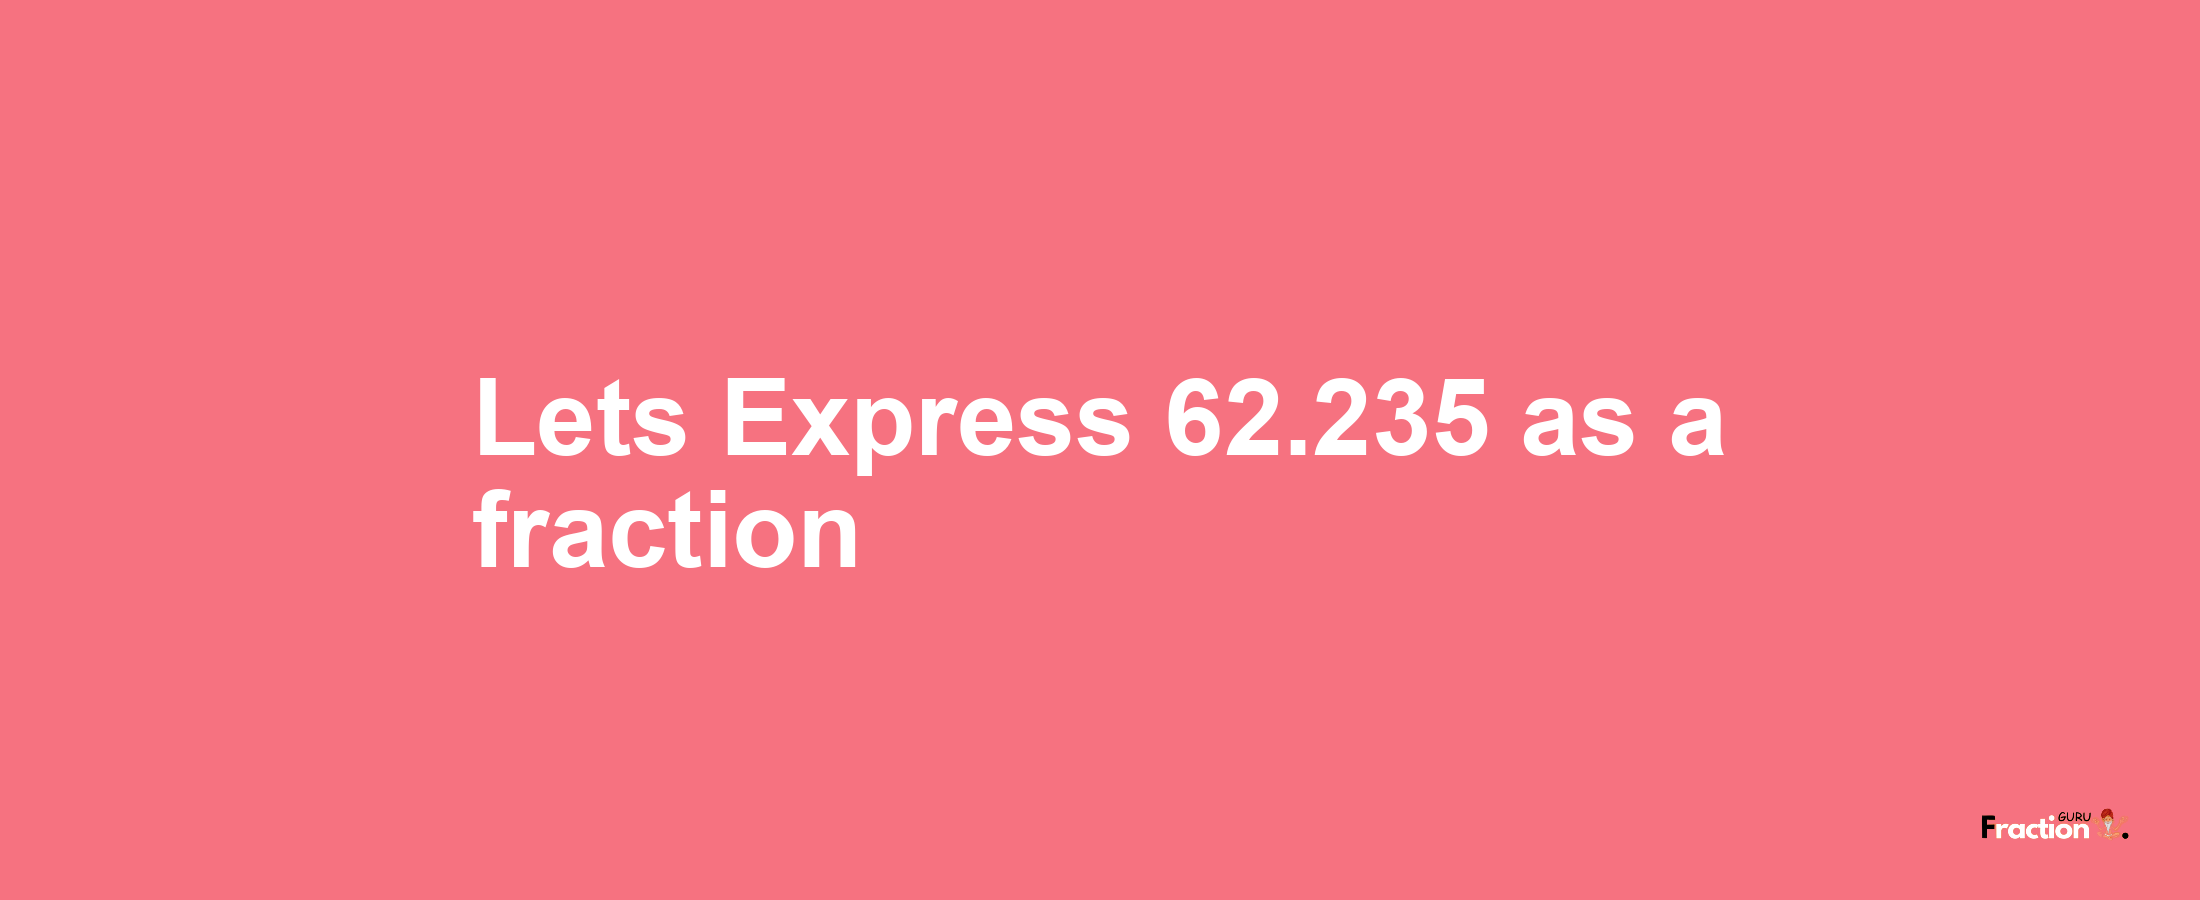 Lets Express 62.235 as afraction